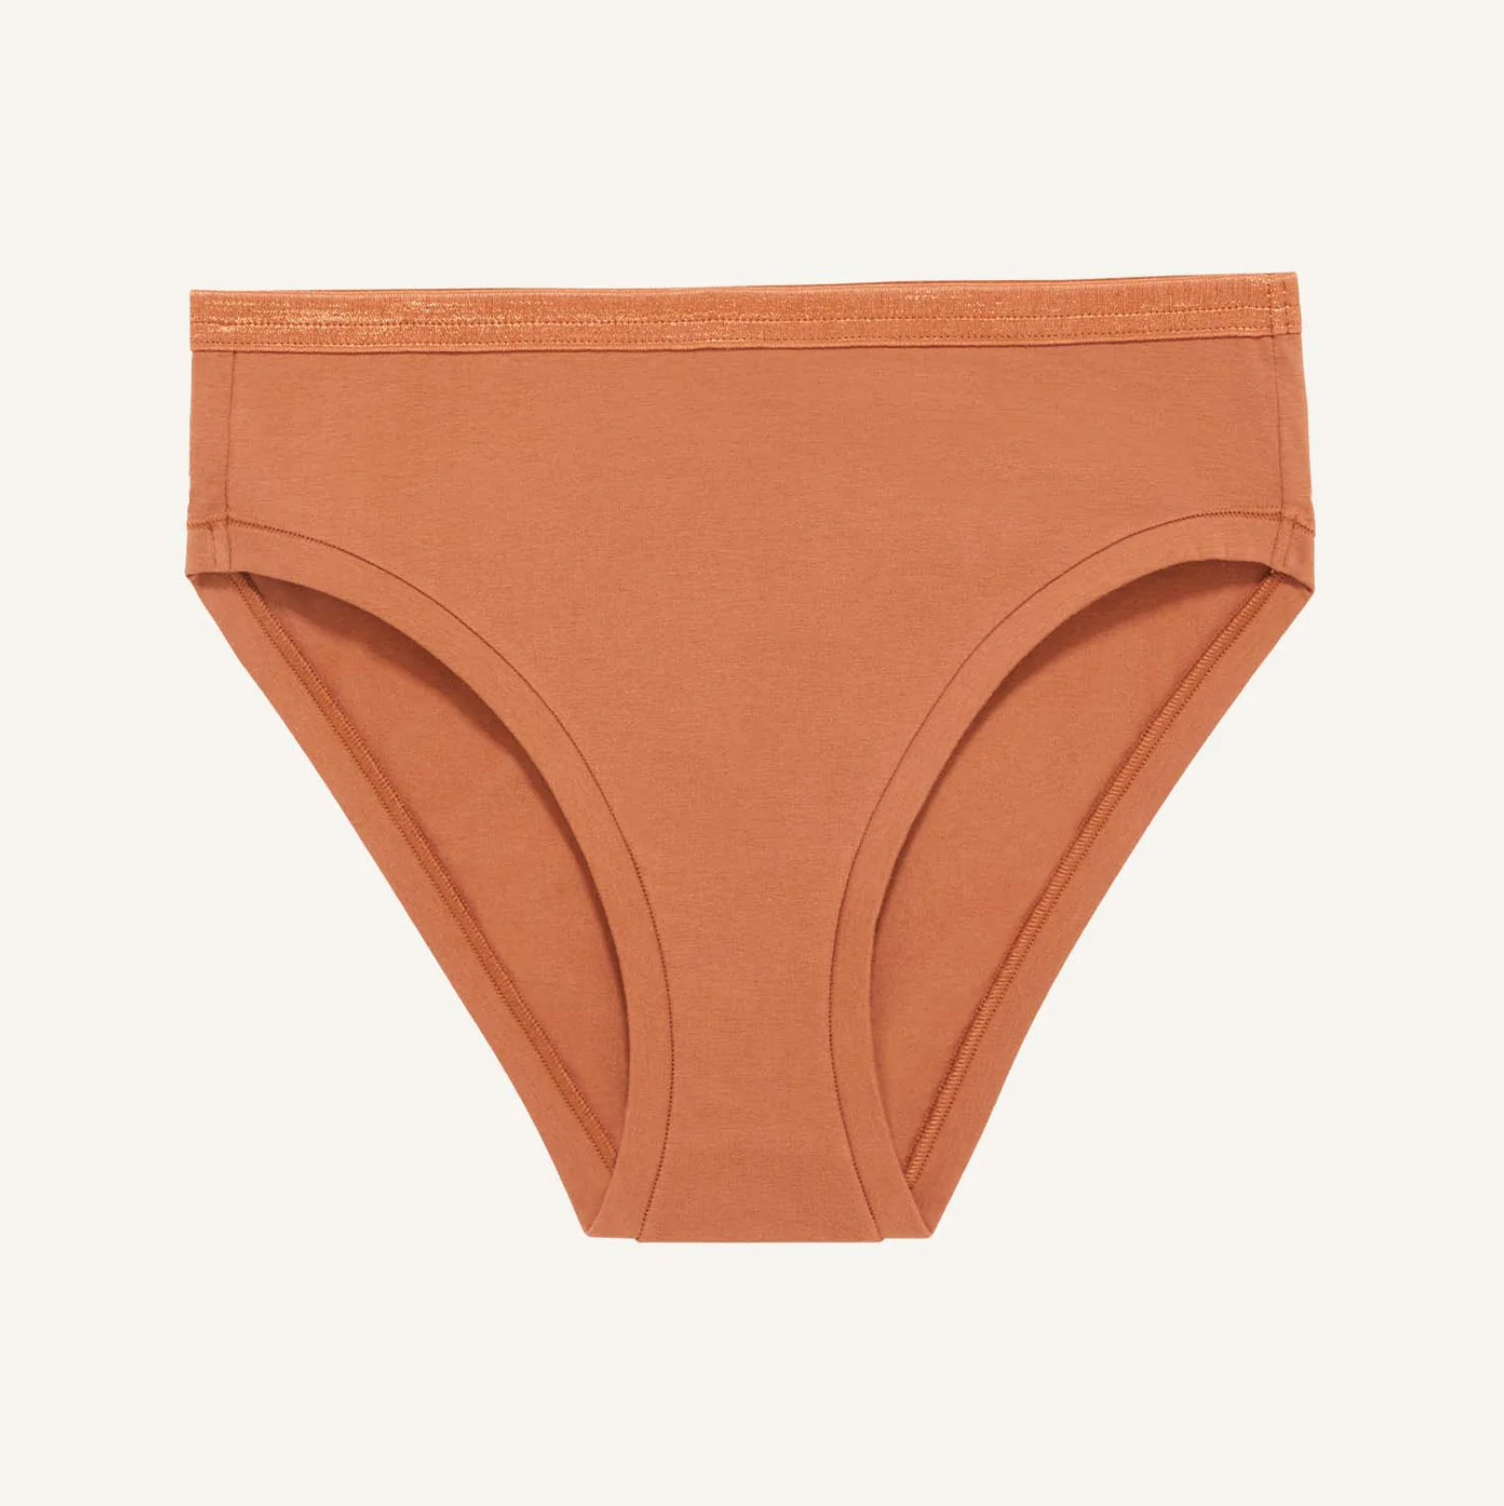 Your New Year's Underwear Color Might Bring You Luck